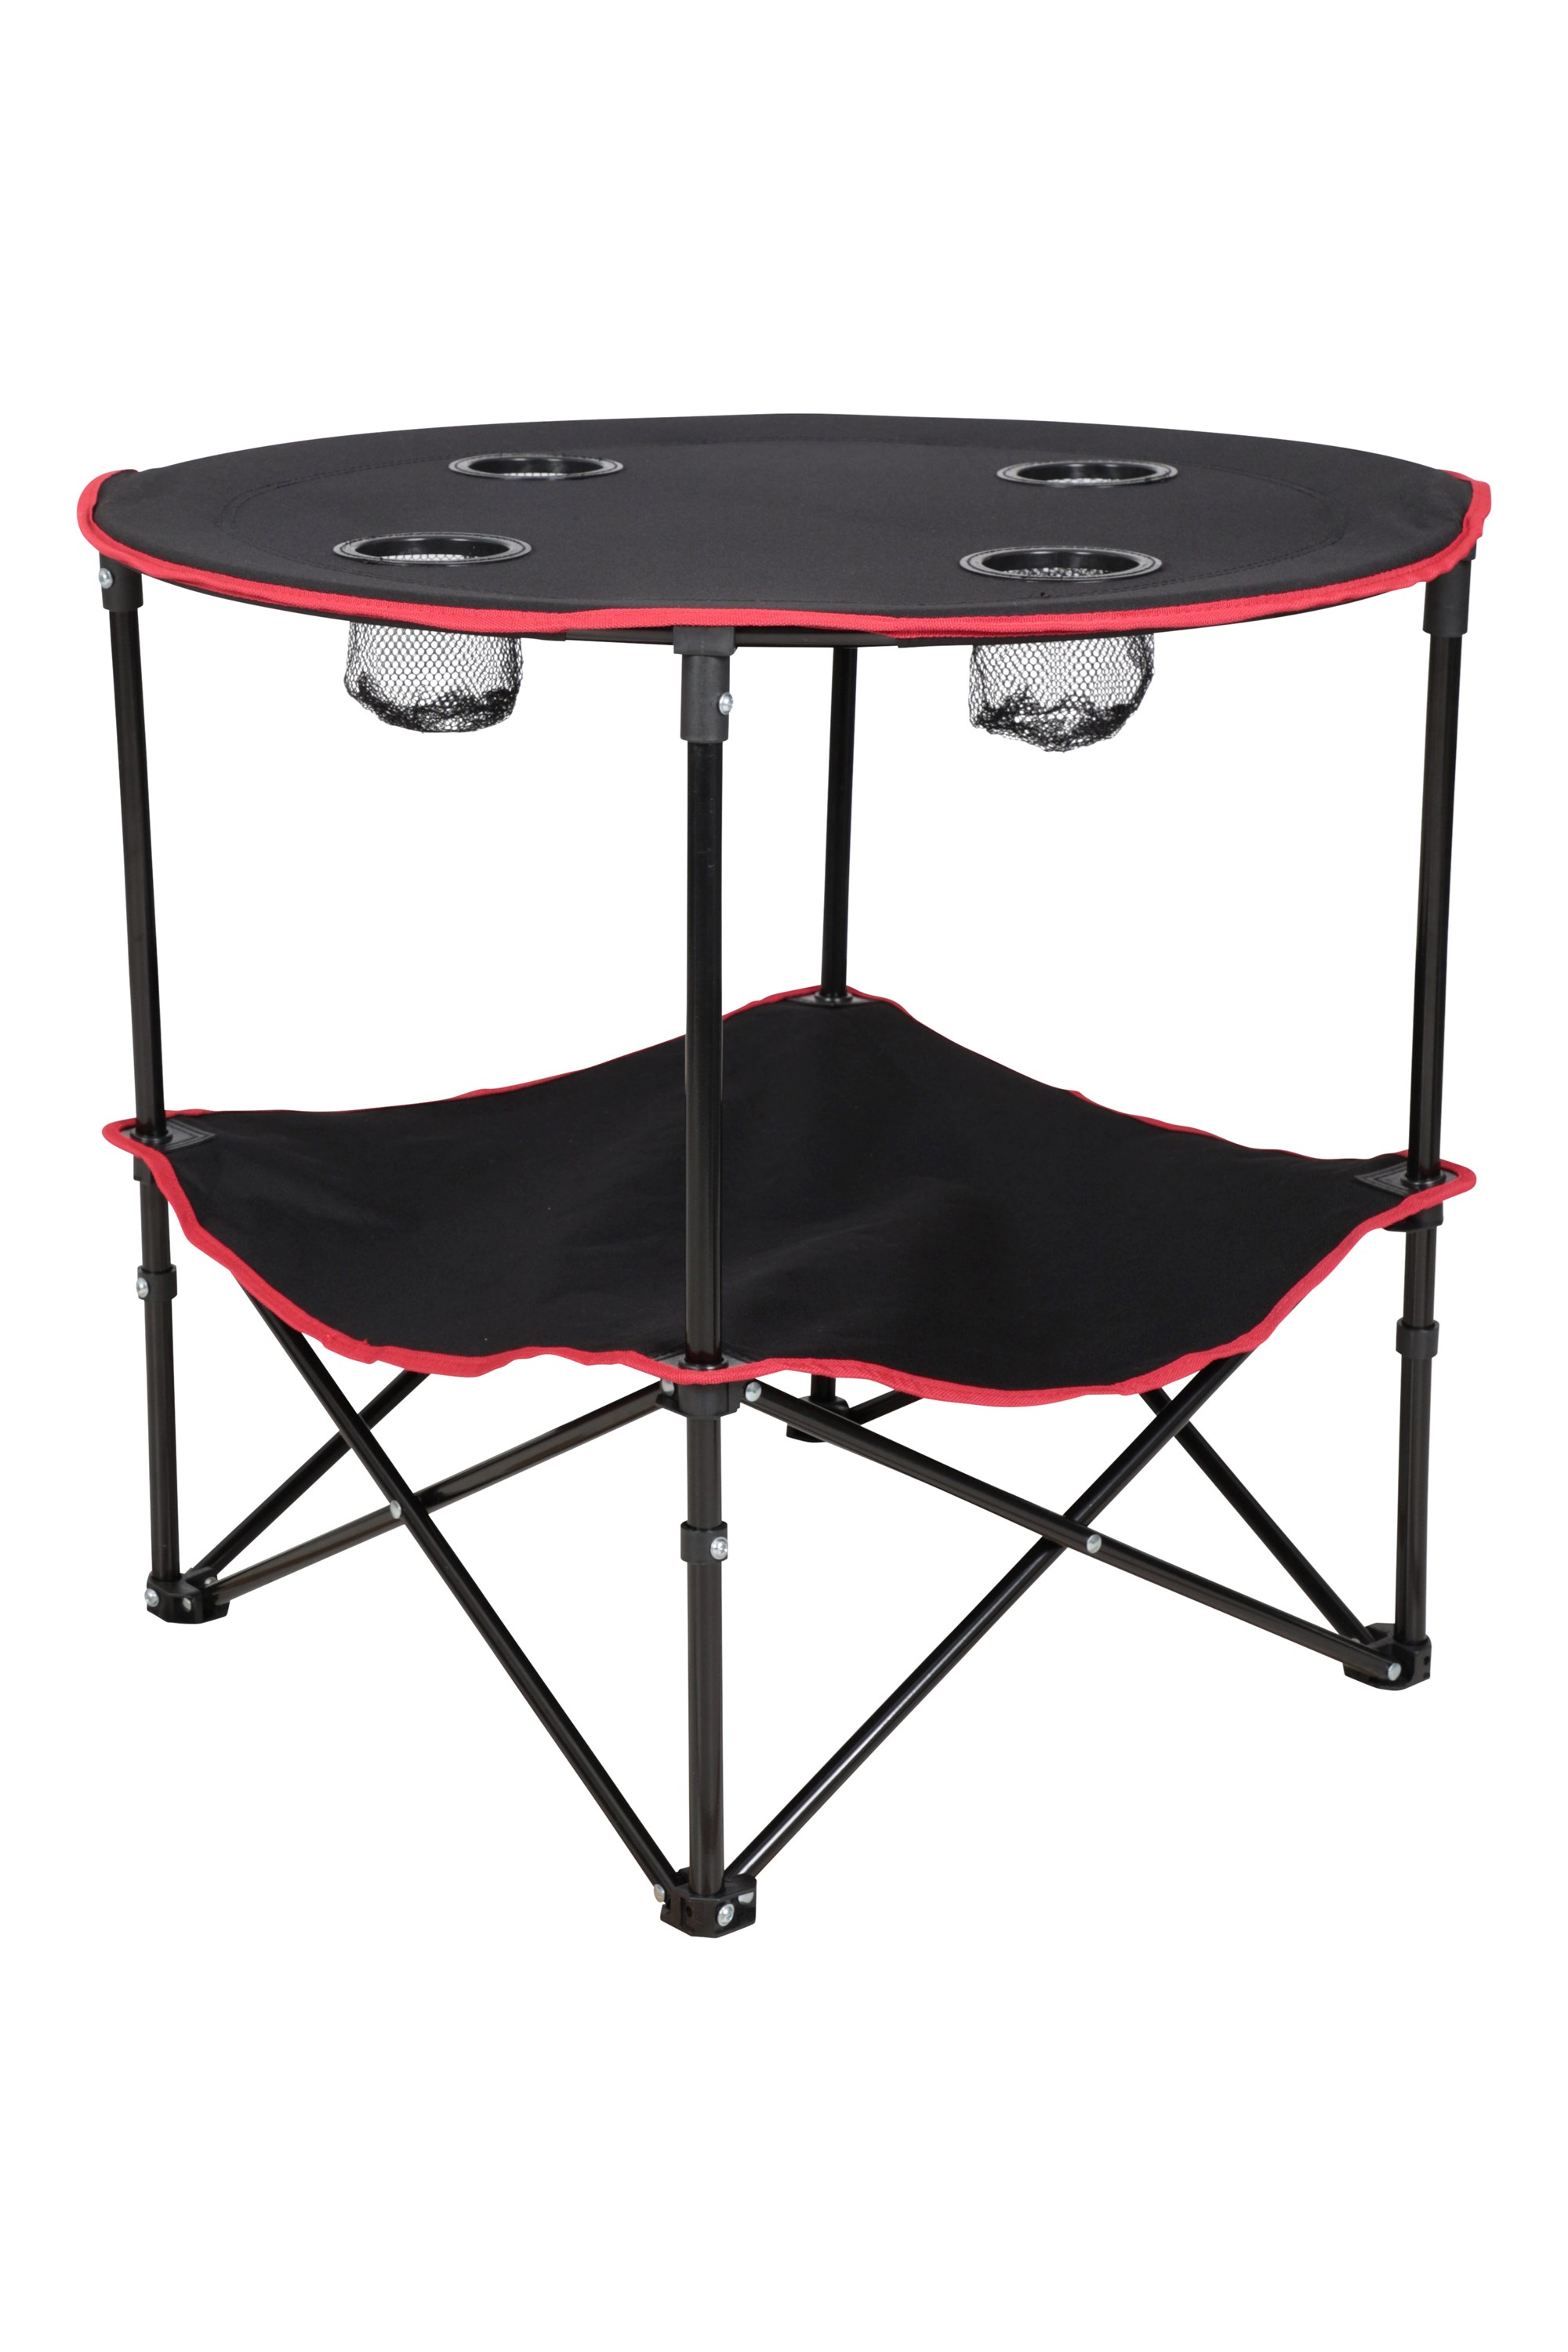 Round Foldable Camping Table With Cup Holders - Black